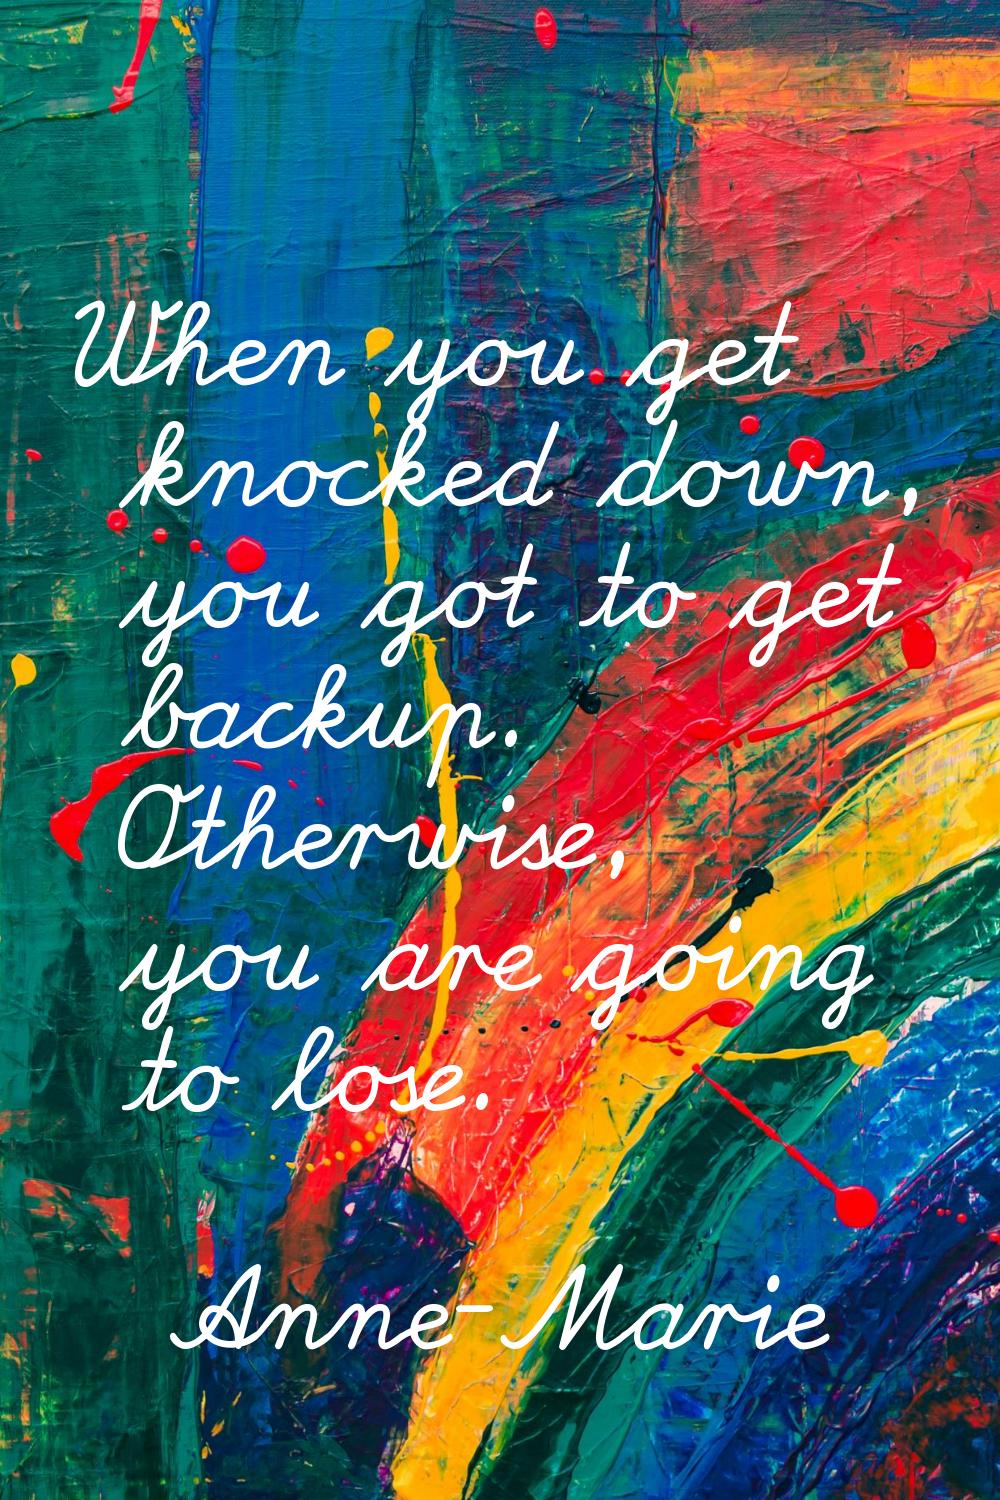 When you get knocked down, you got to get backup. Otherwise, you are going to lose.